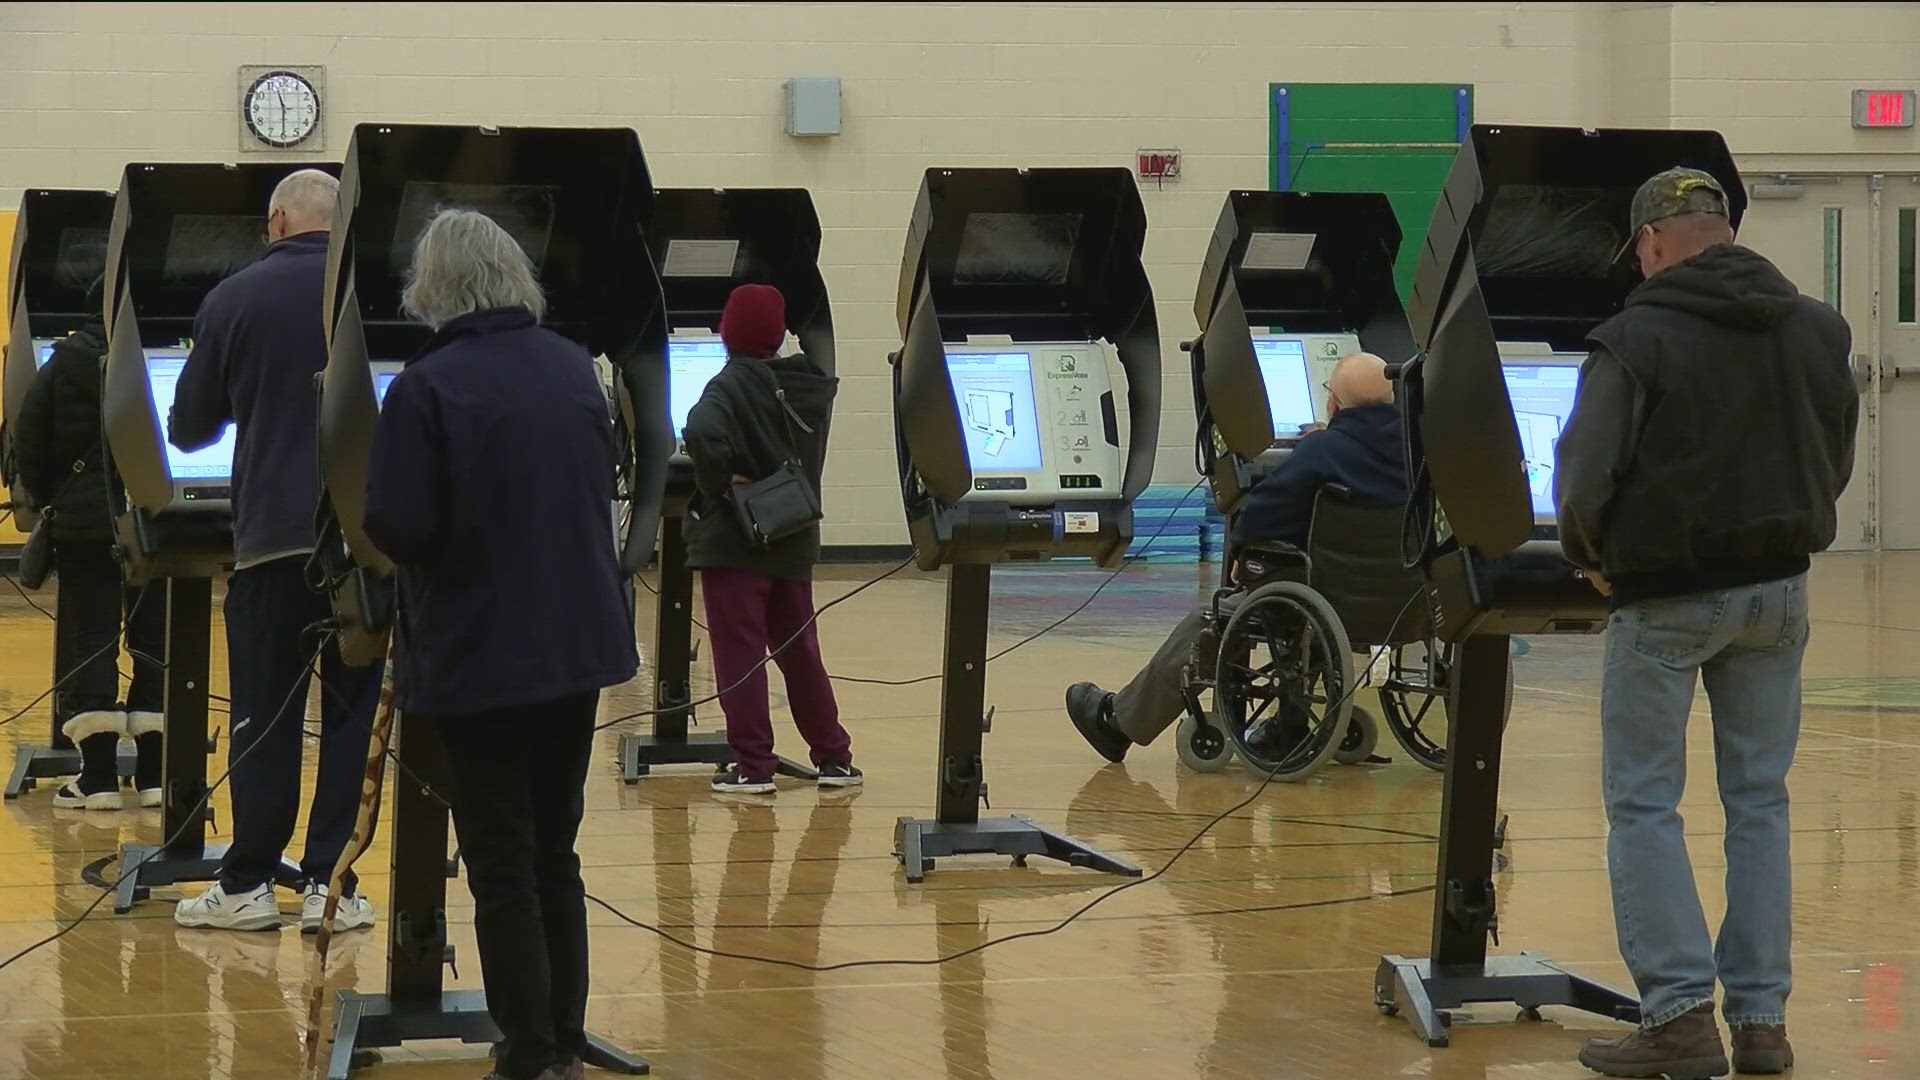 With a few months until the election, the Lucas County Board of Elections is warning some voters may not be able to cast a ballot if they don't follow proper steps.